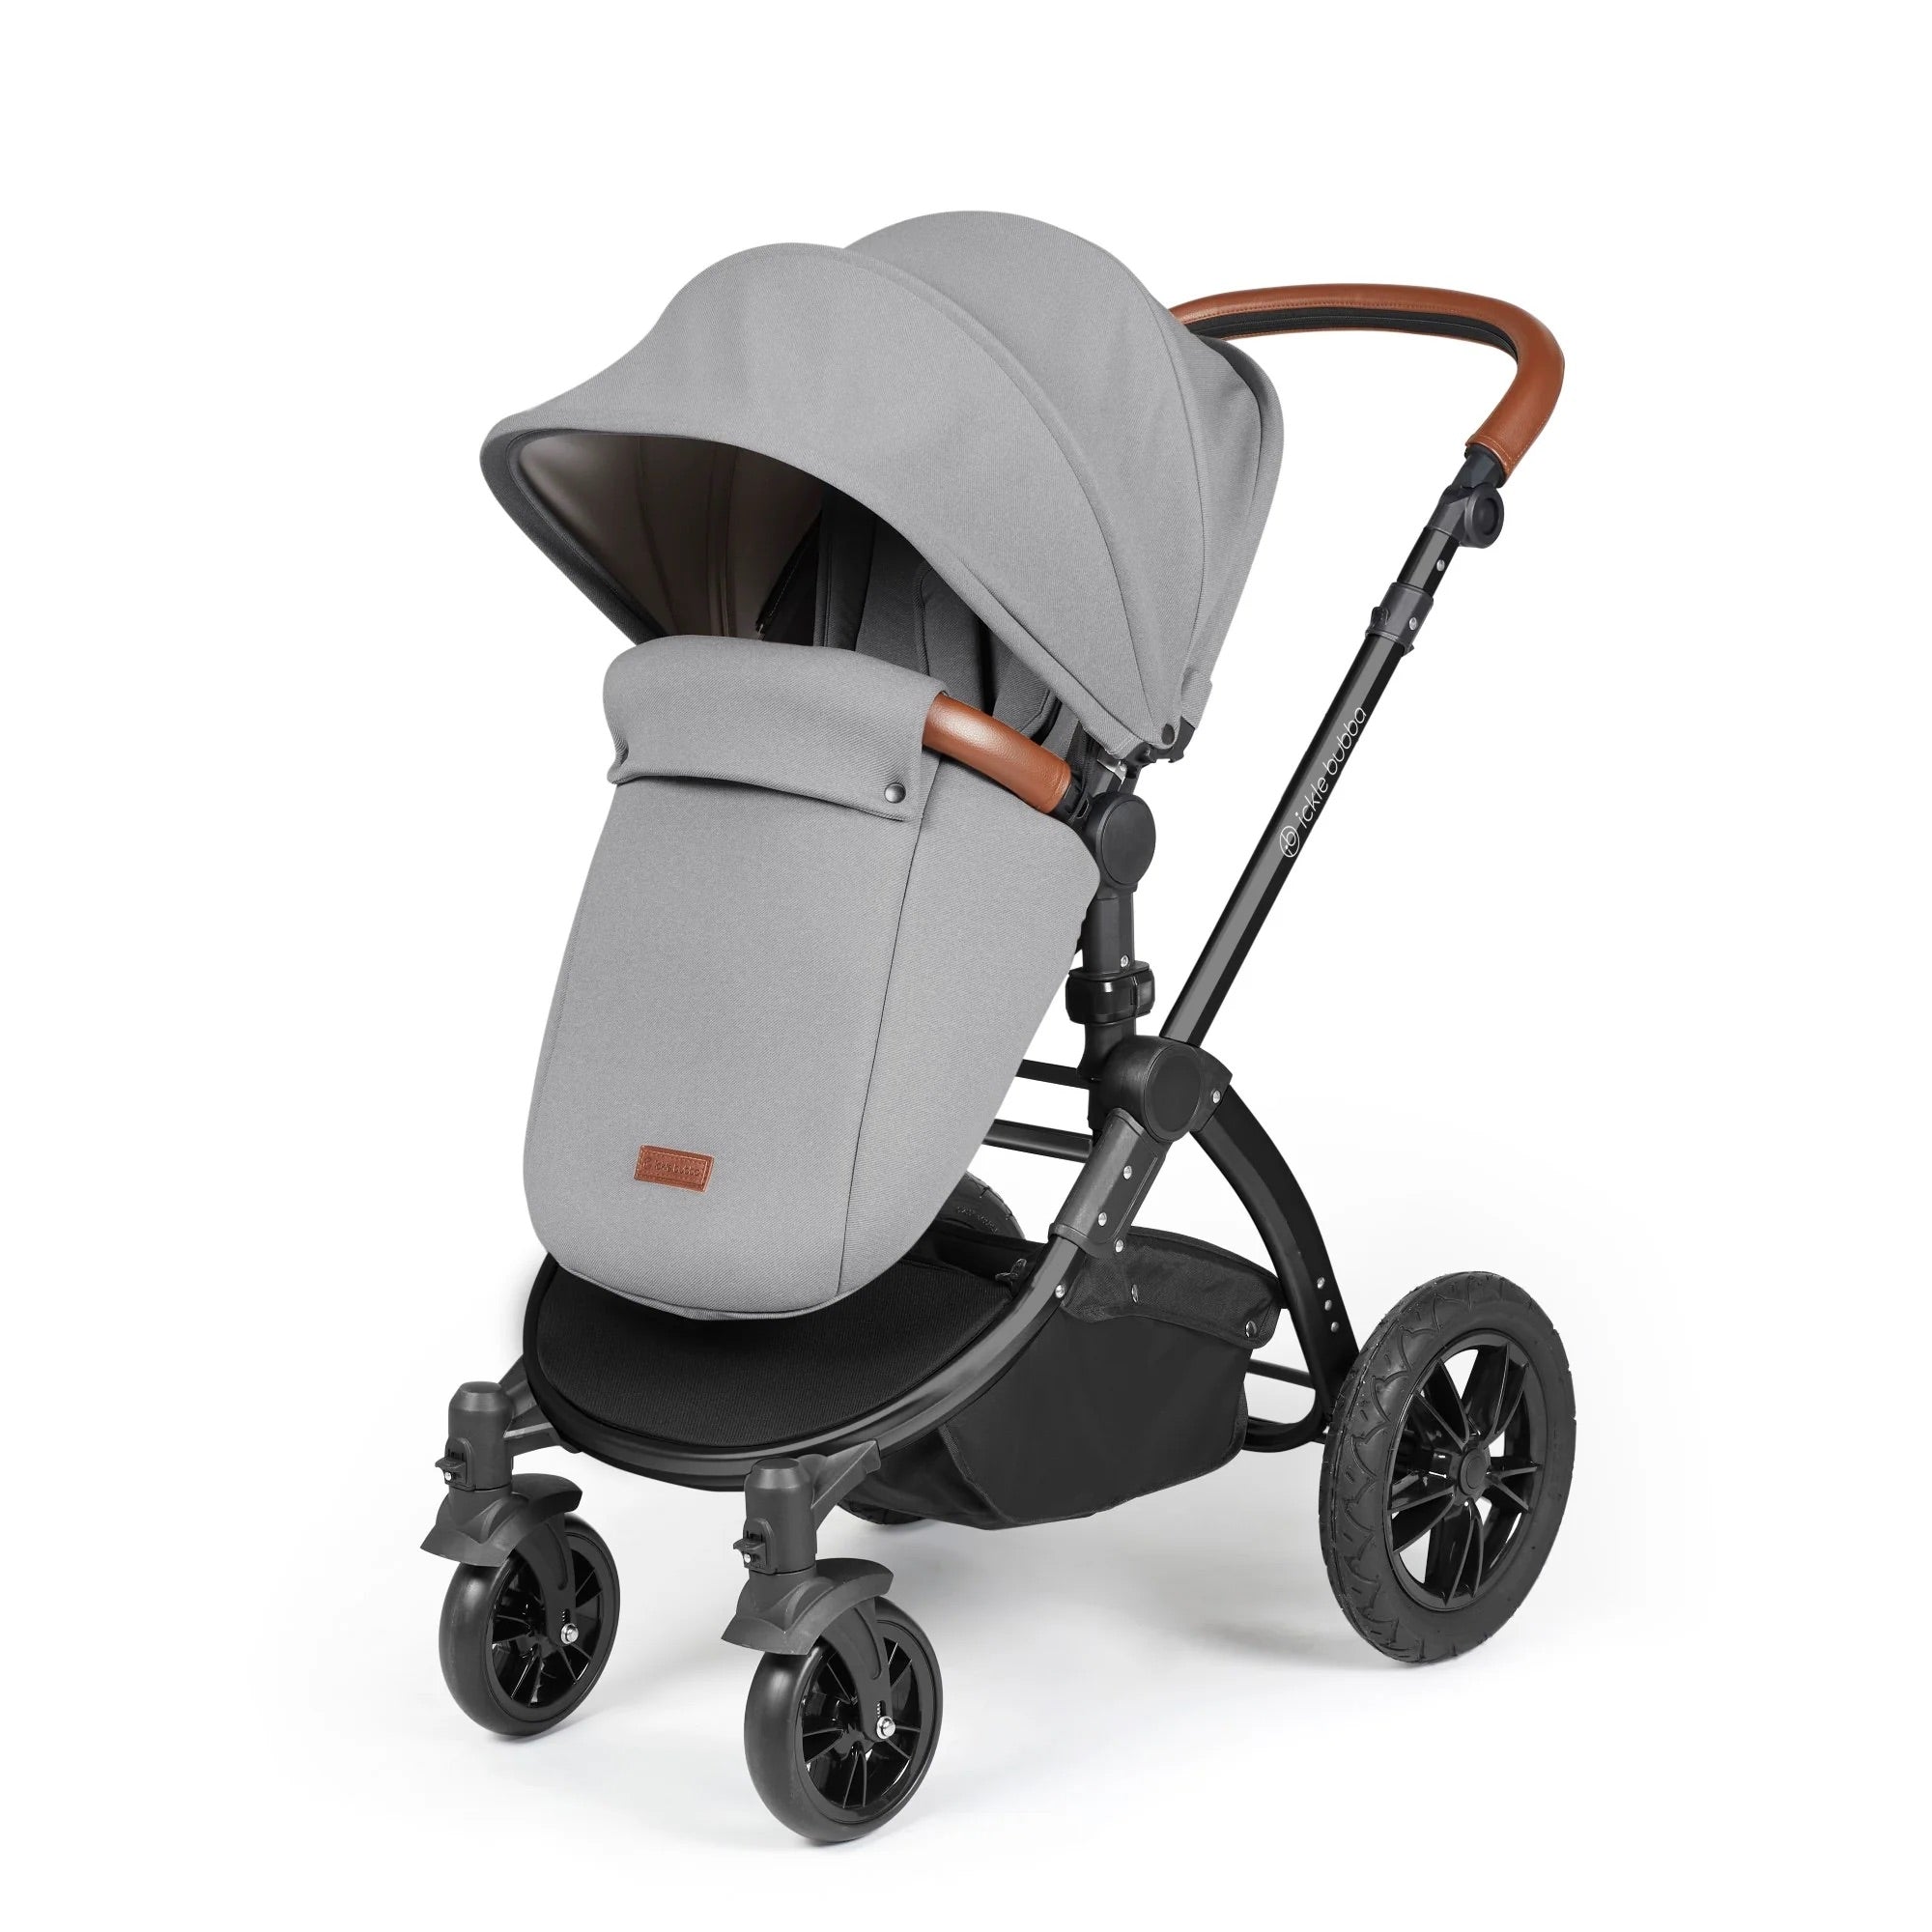 Ickle Bubba Stomp Luxe 2 in 1 Pushchair - Black / Pearl Grey / Tan - For Your Little One